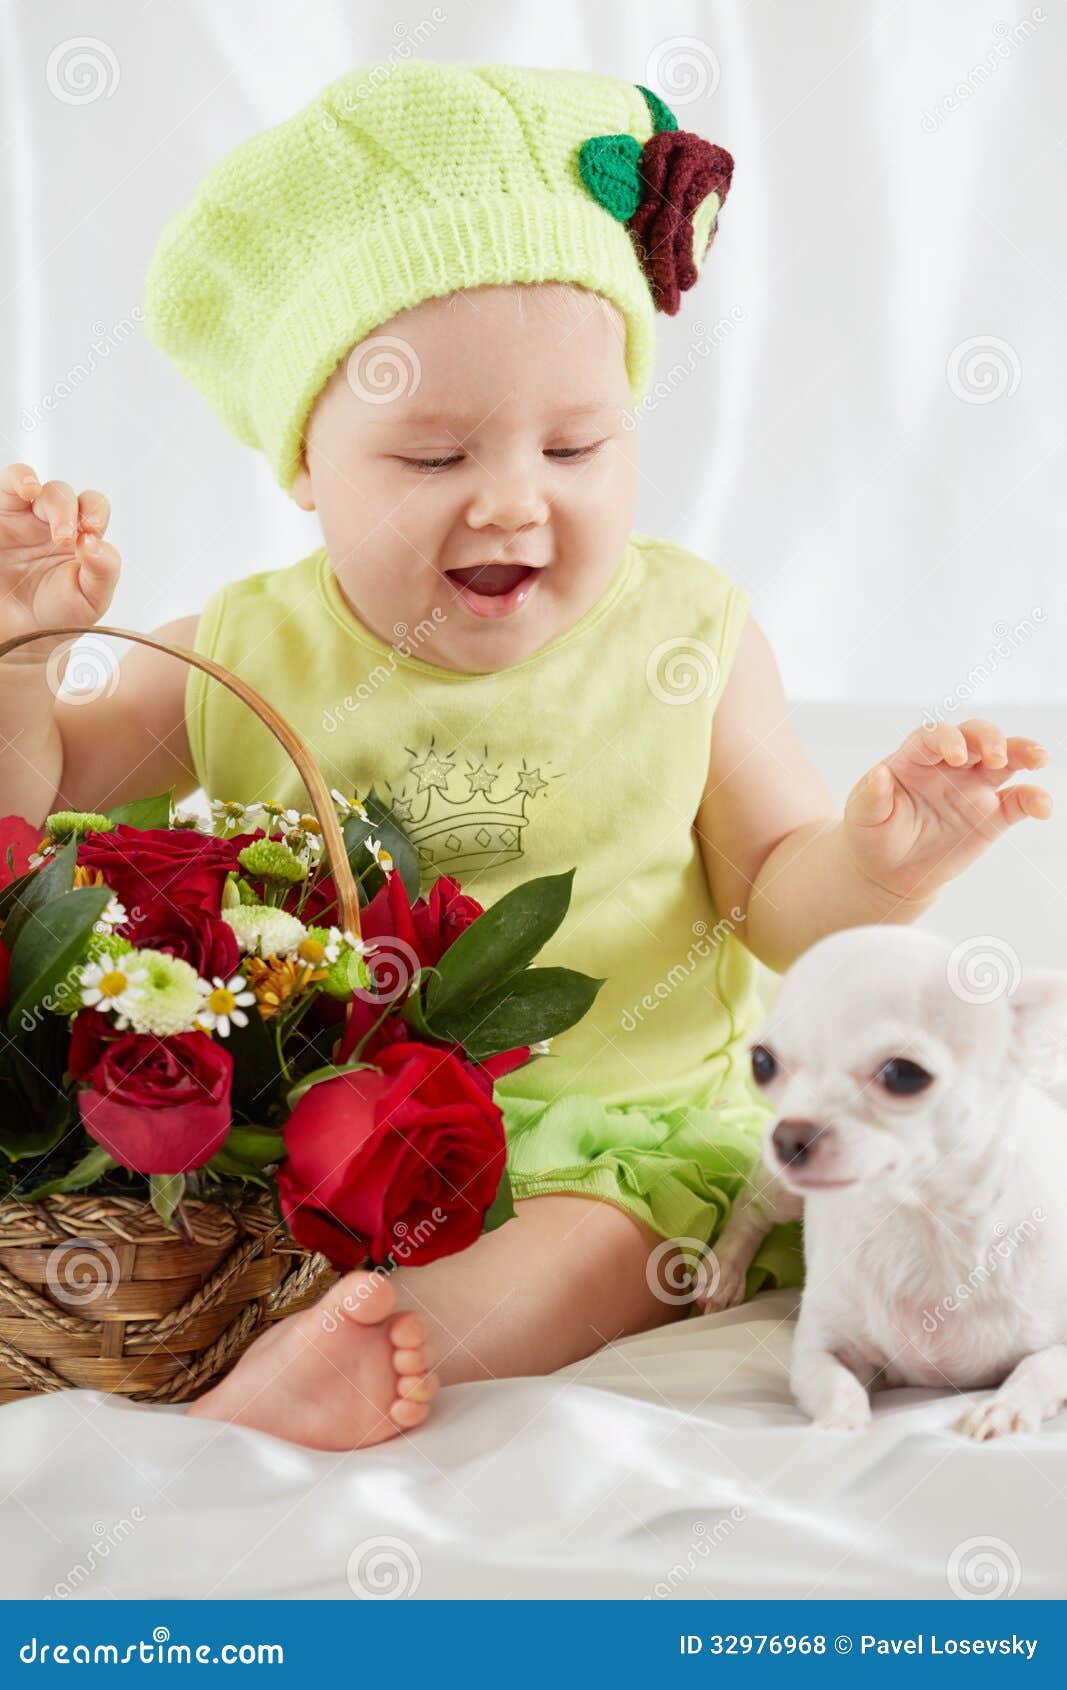 joyful little girl in greenish clothes and hat sits on bedding